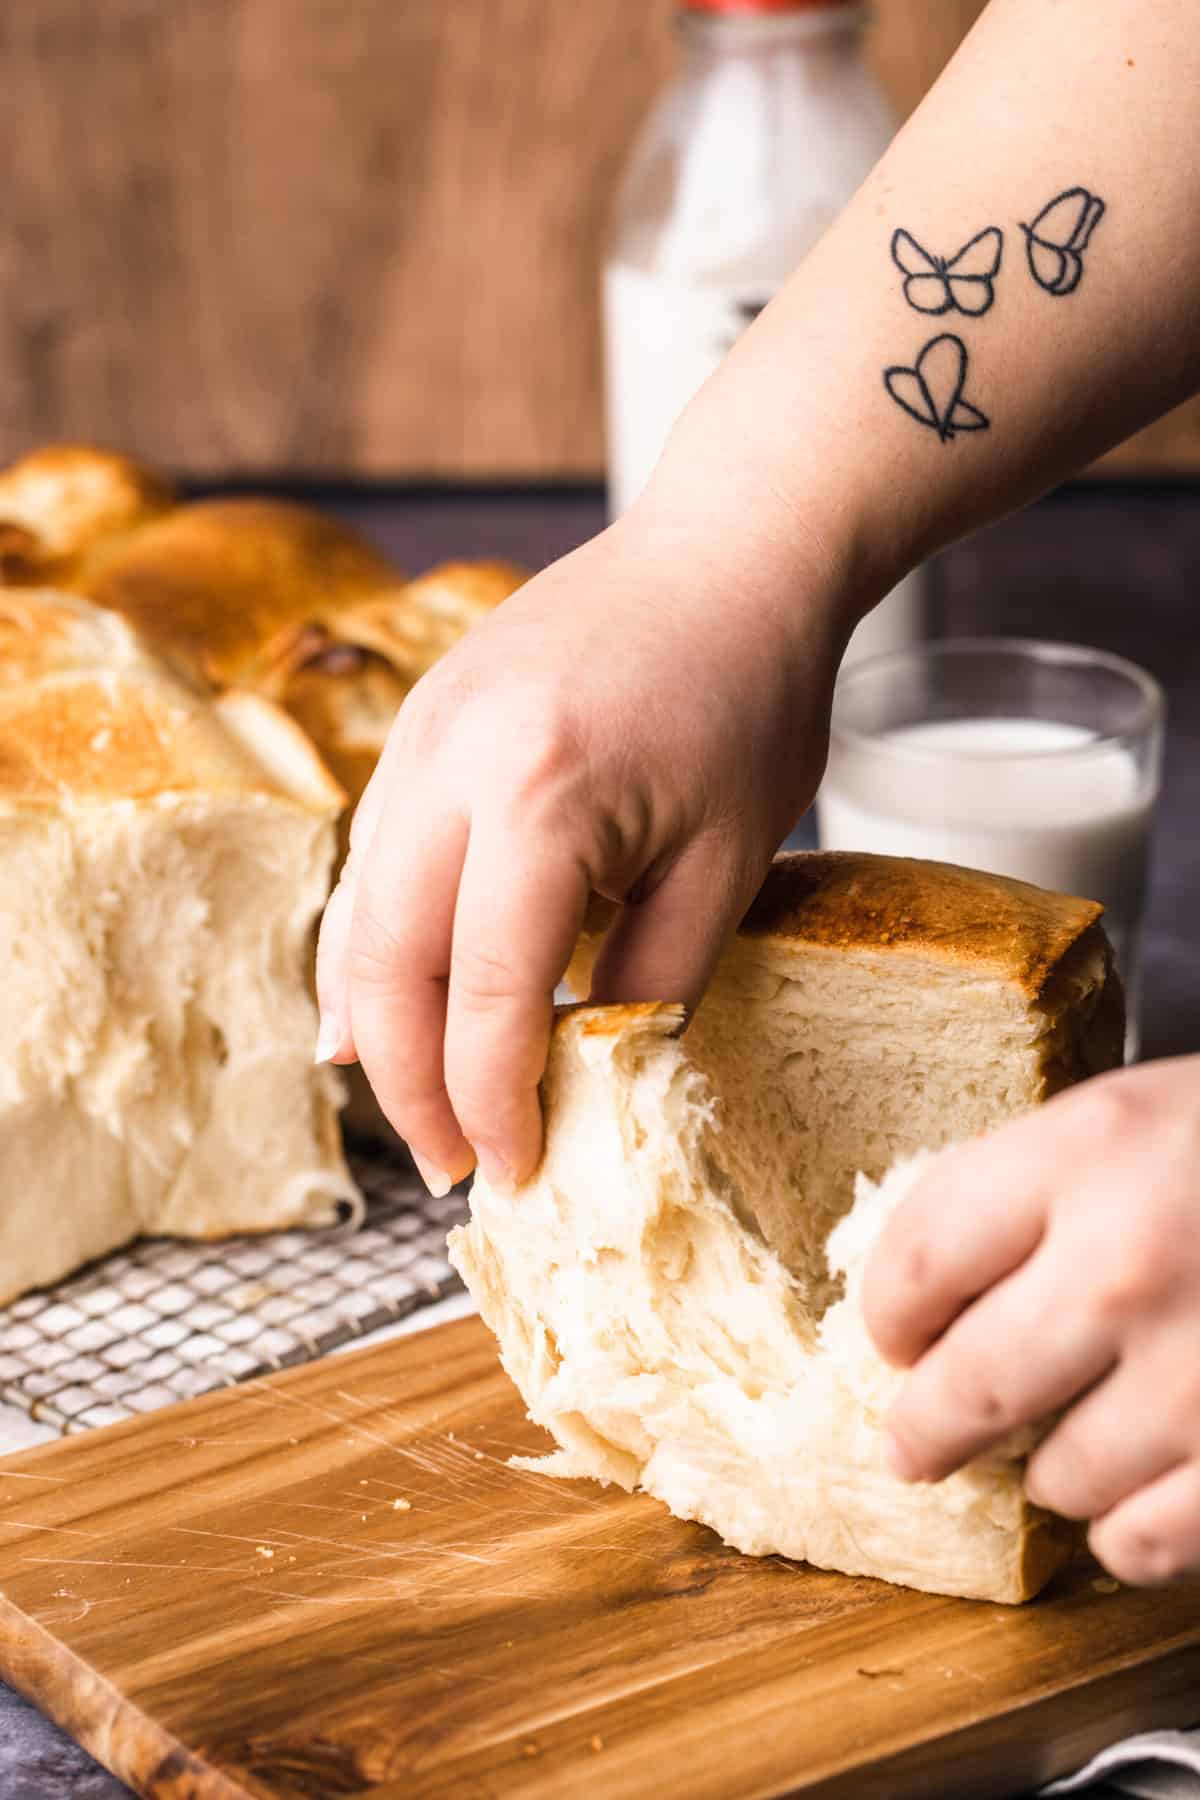 A set of hands is peeling a slice of Japanese milk bread from the loaf.